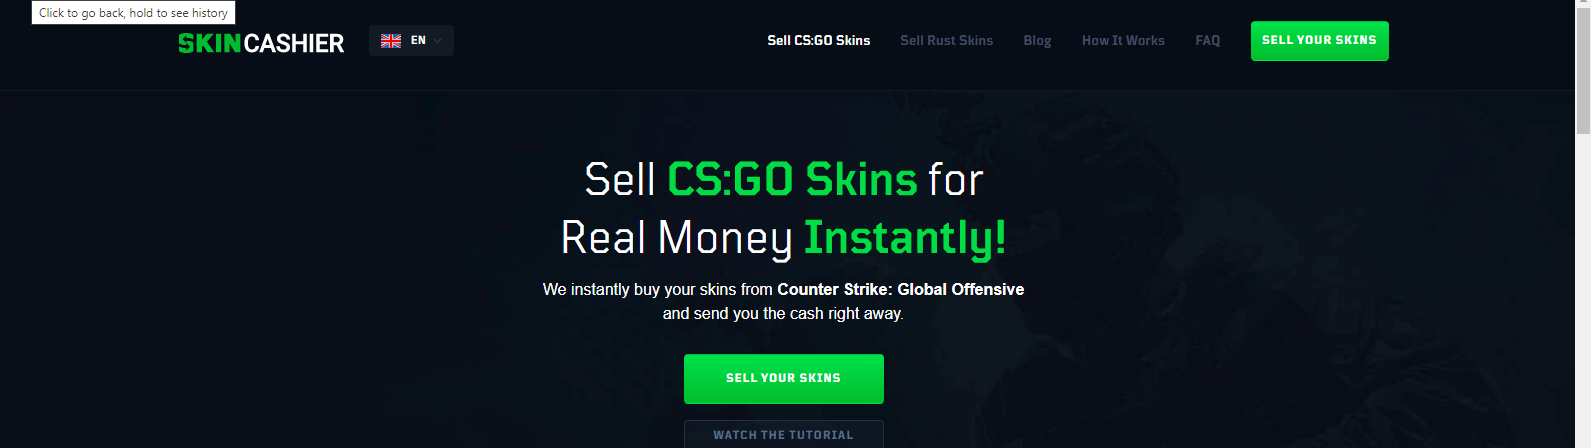 Why Some People Almost Always Save Money With Promotional referral code and CSGO500 voucher